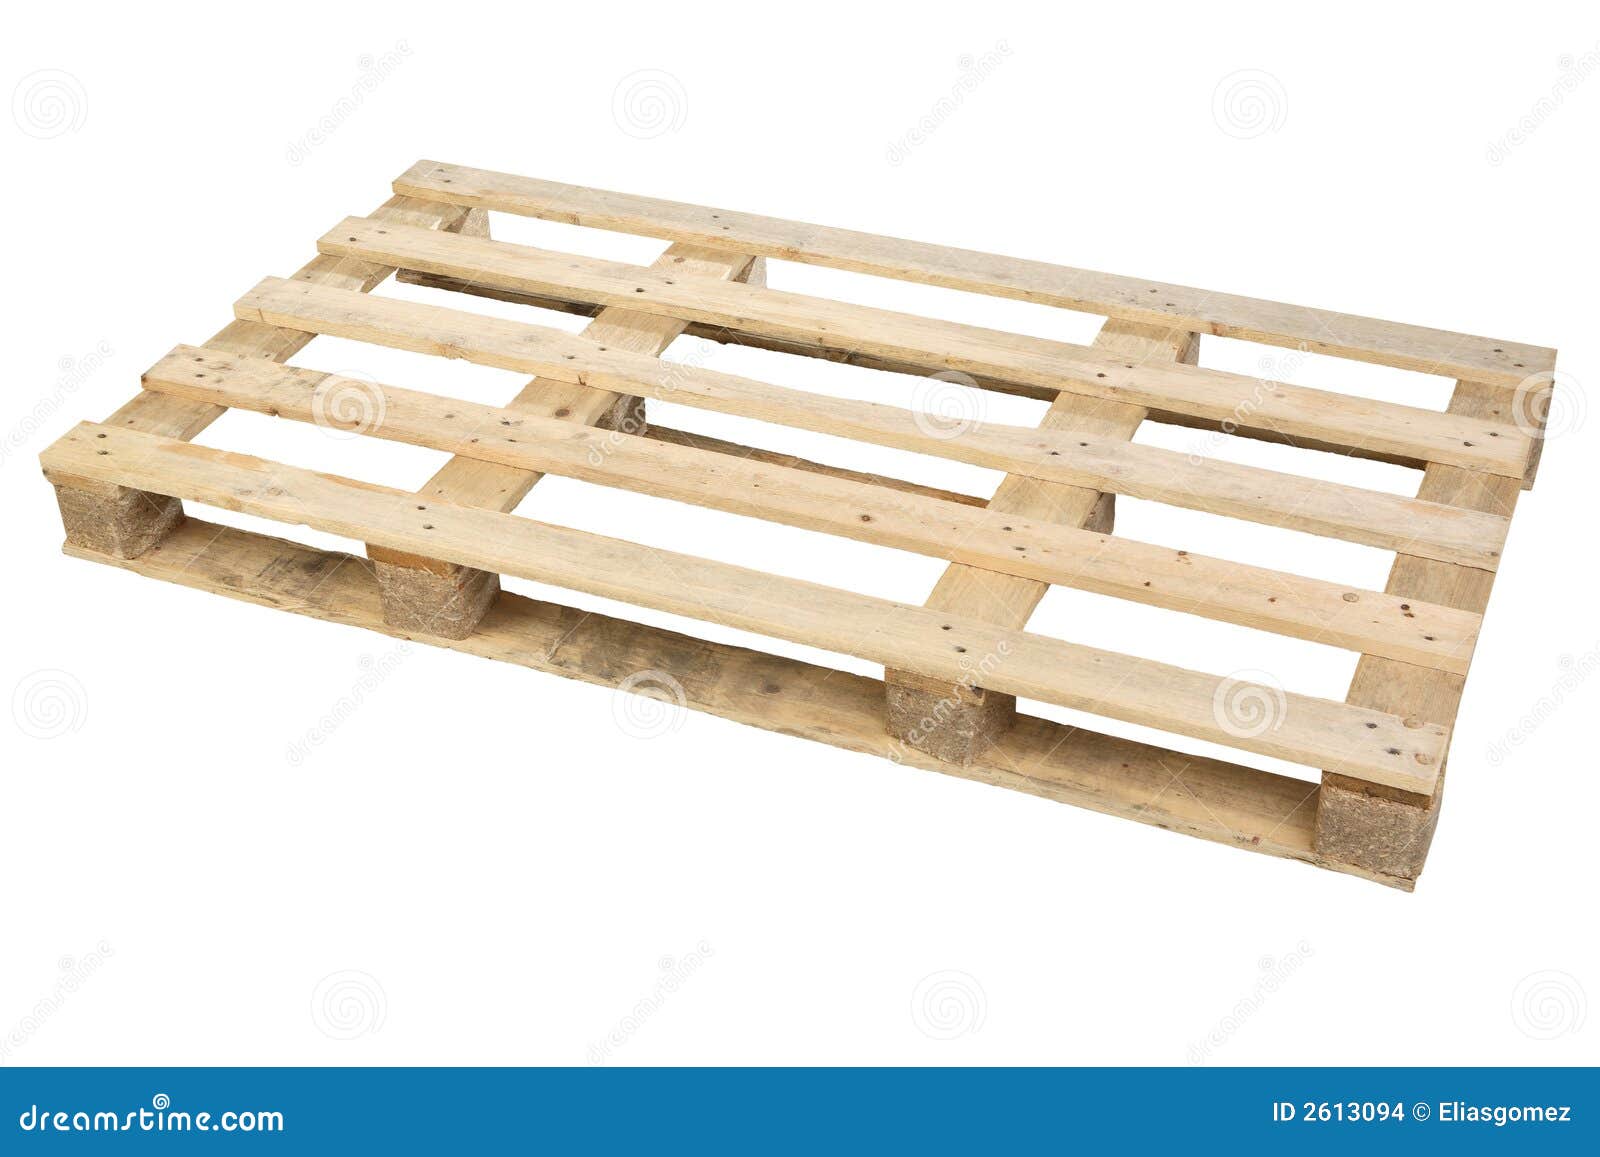 7-1 standard iso crate stock of pallet Image industry, Shipping photo.